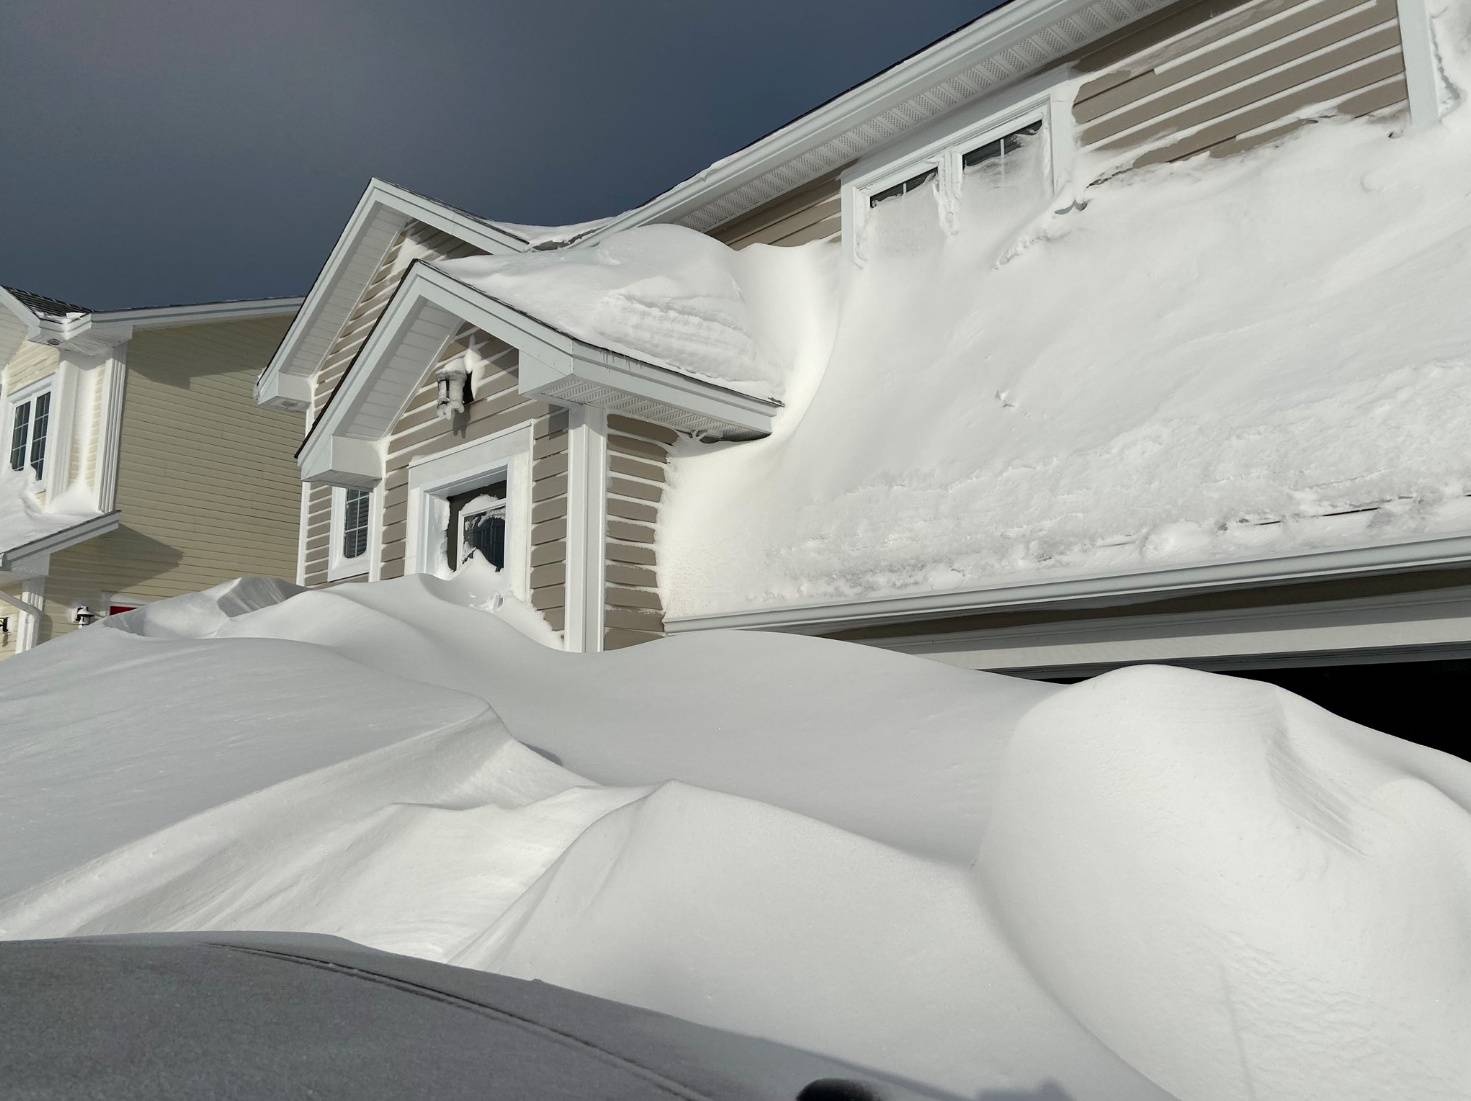 Pile of snow is pictured outside a house in St John's